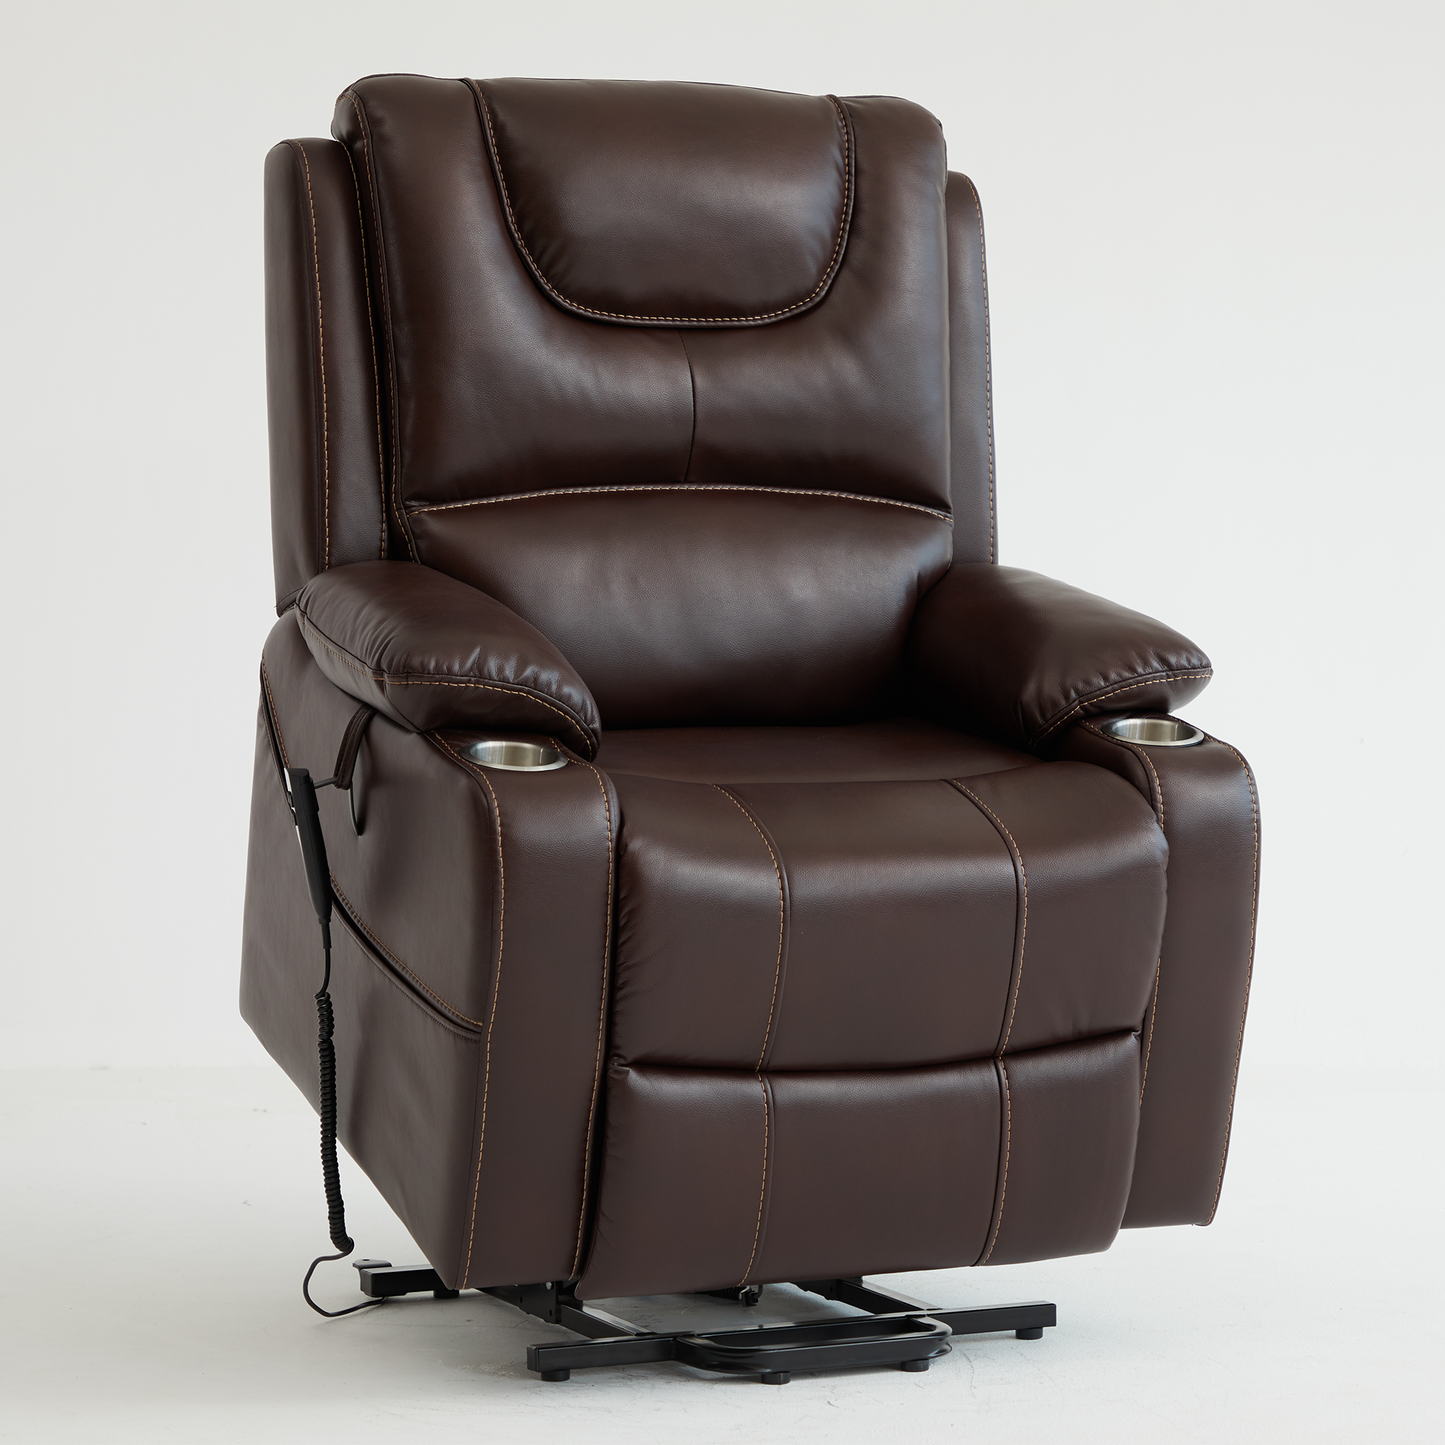 Extra Wide Heavy Duty Recliners -Designed For Tall Man